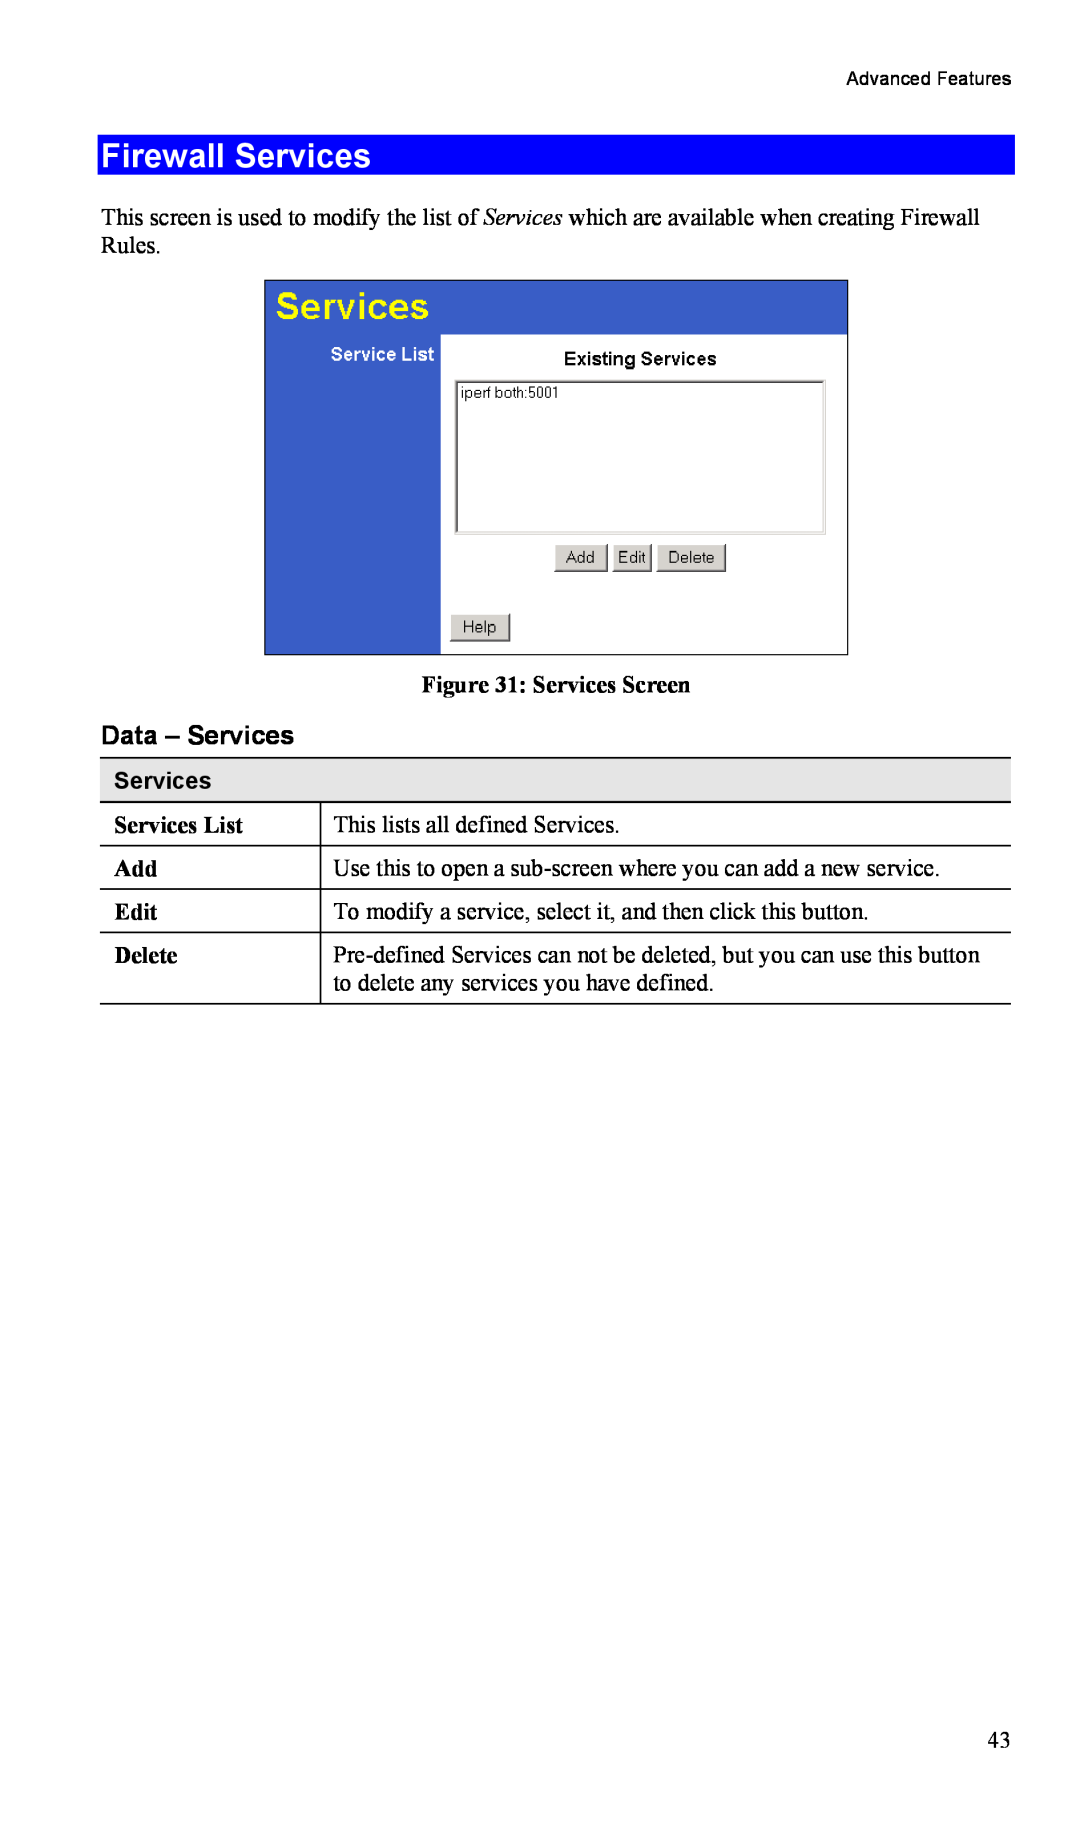 TRENDnet TW100-BRM504 manual Firewall Services, Data - Services 